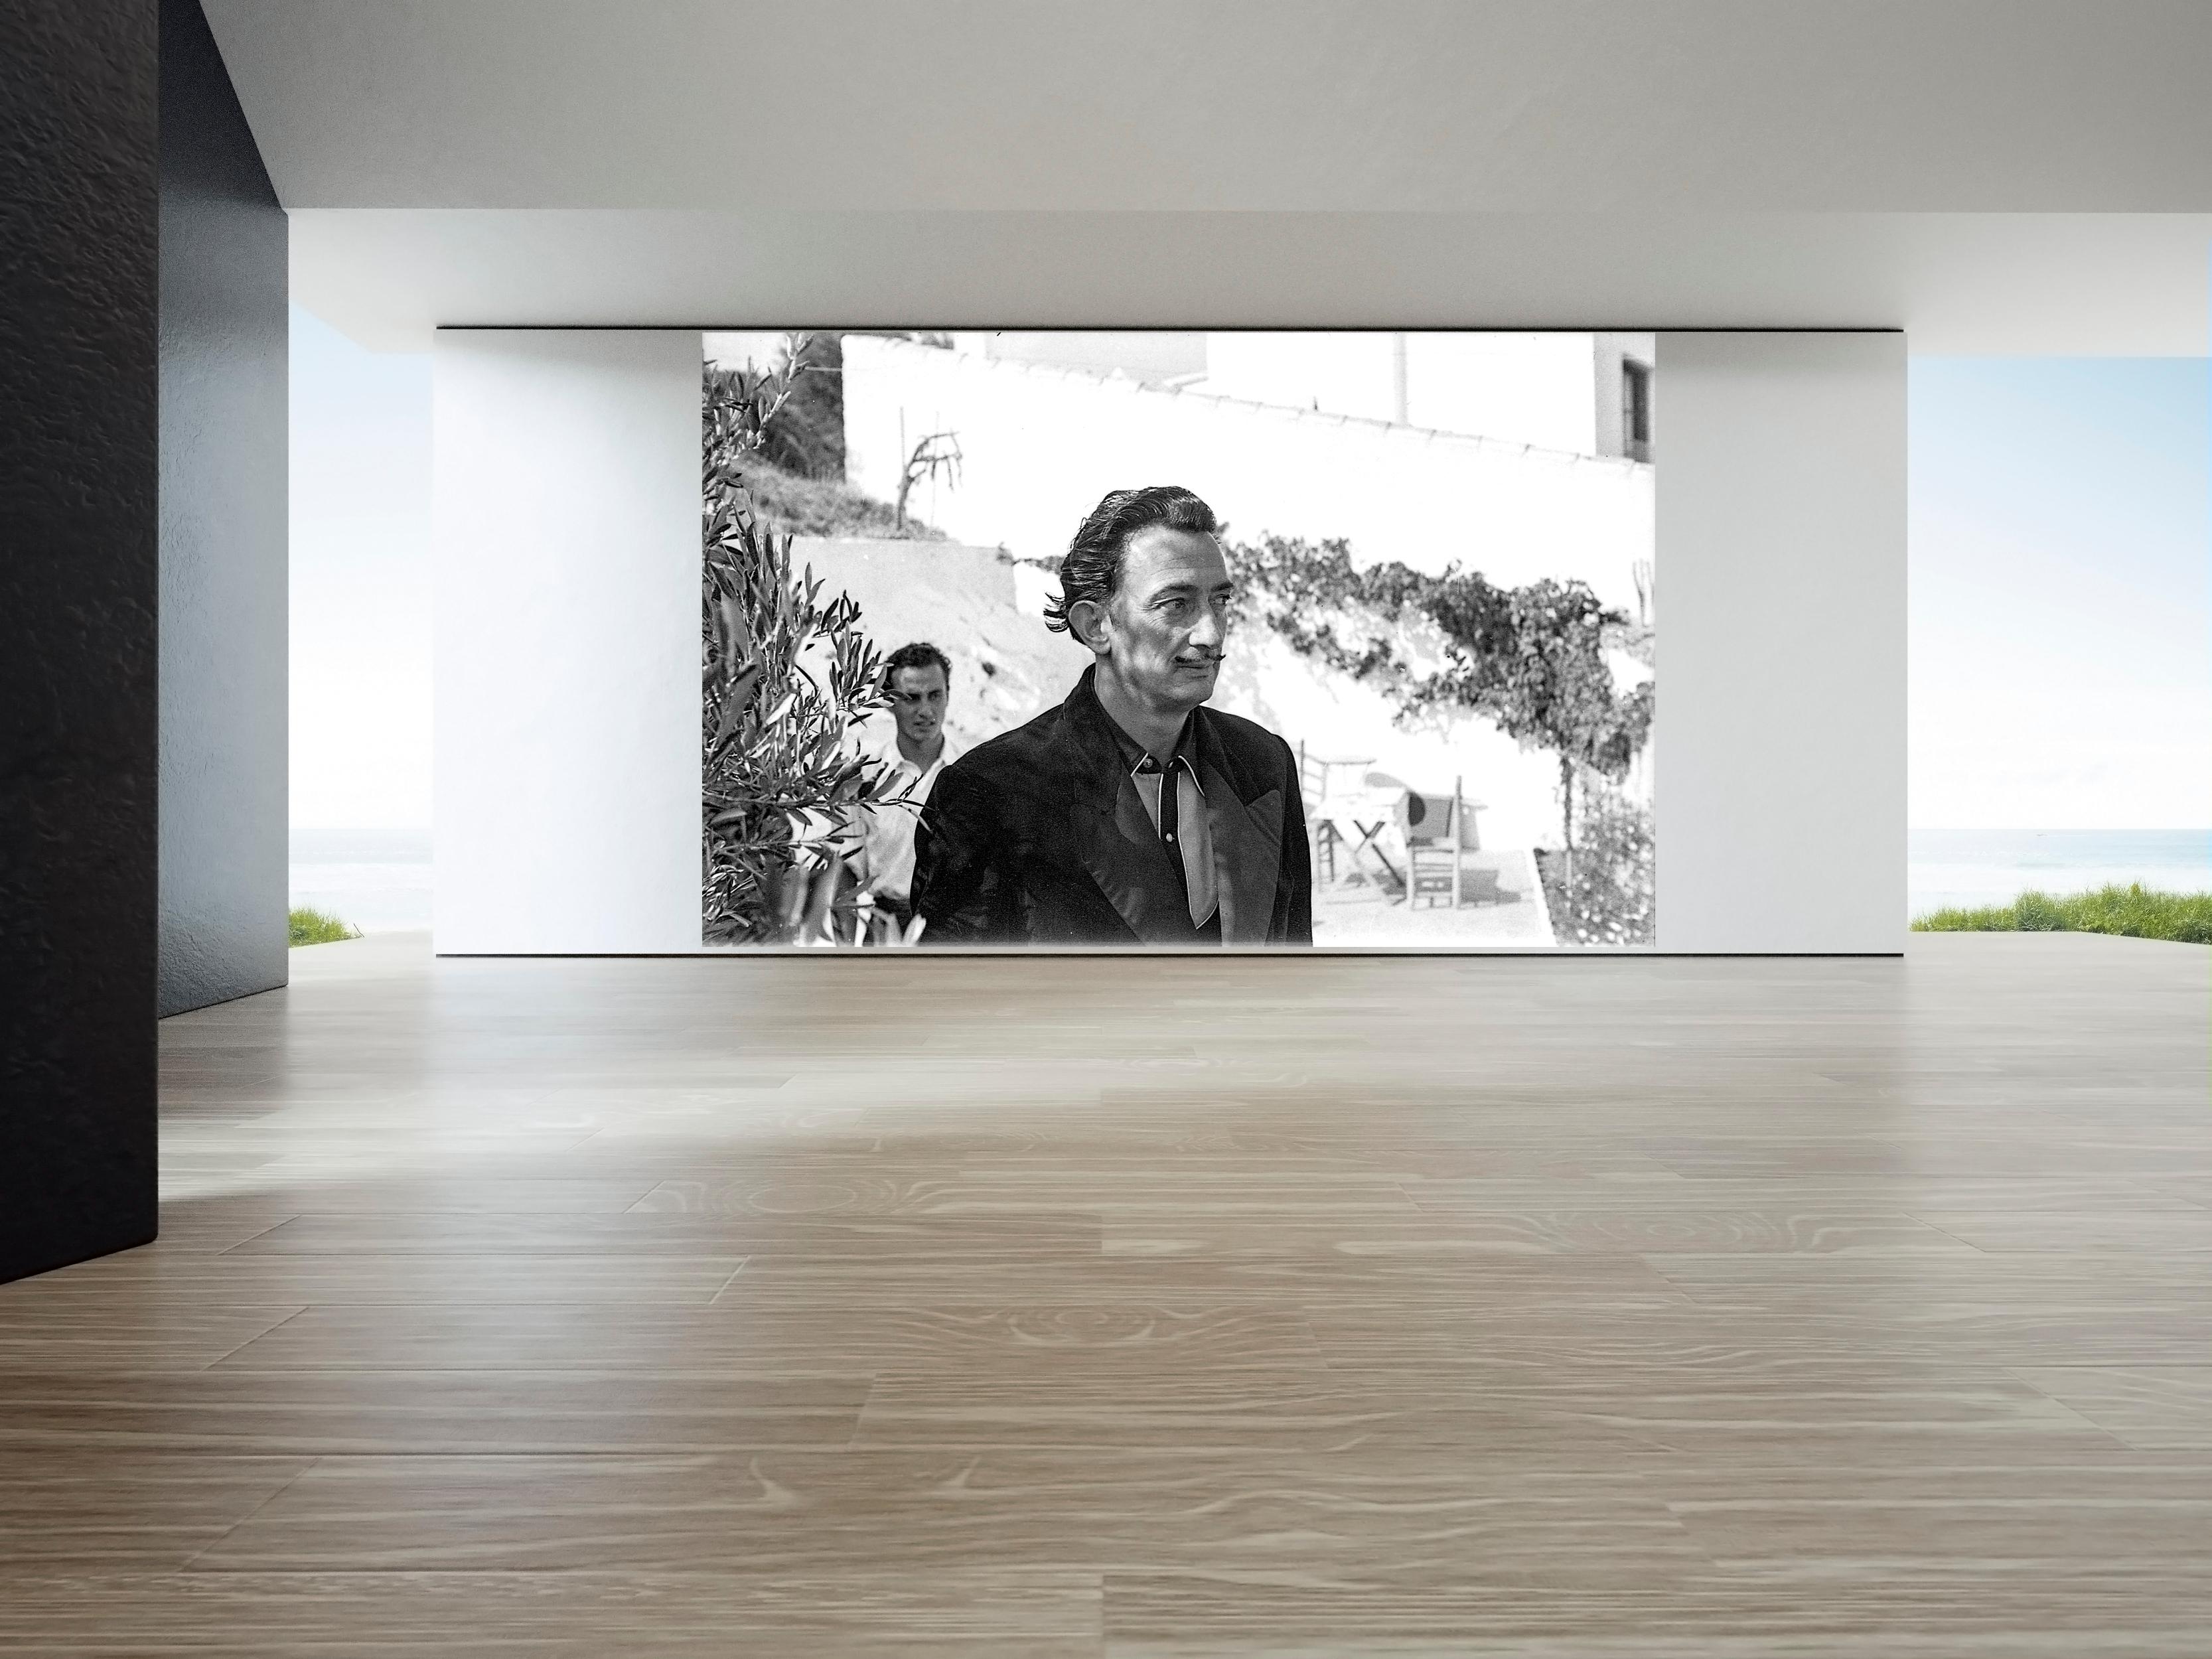 Salvador Dali 8   47 in x 70 in (Black and White) - Photograph by Jose Luis Beltran Gras